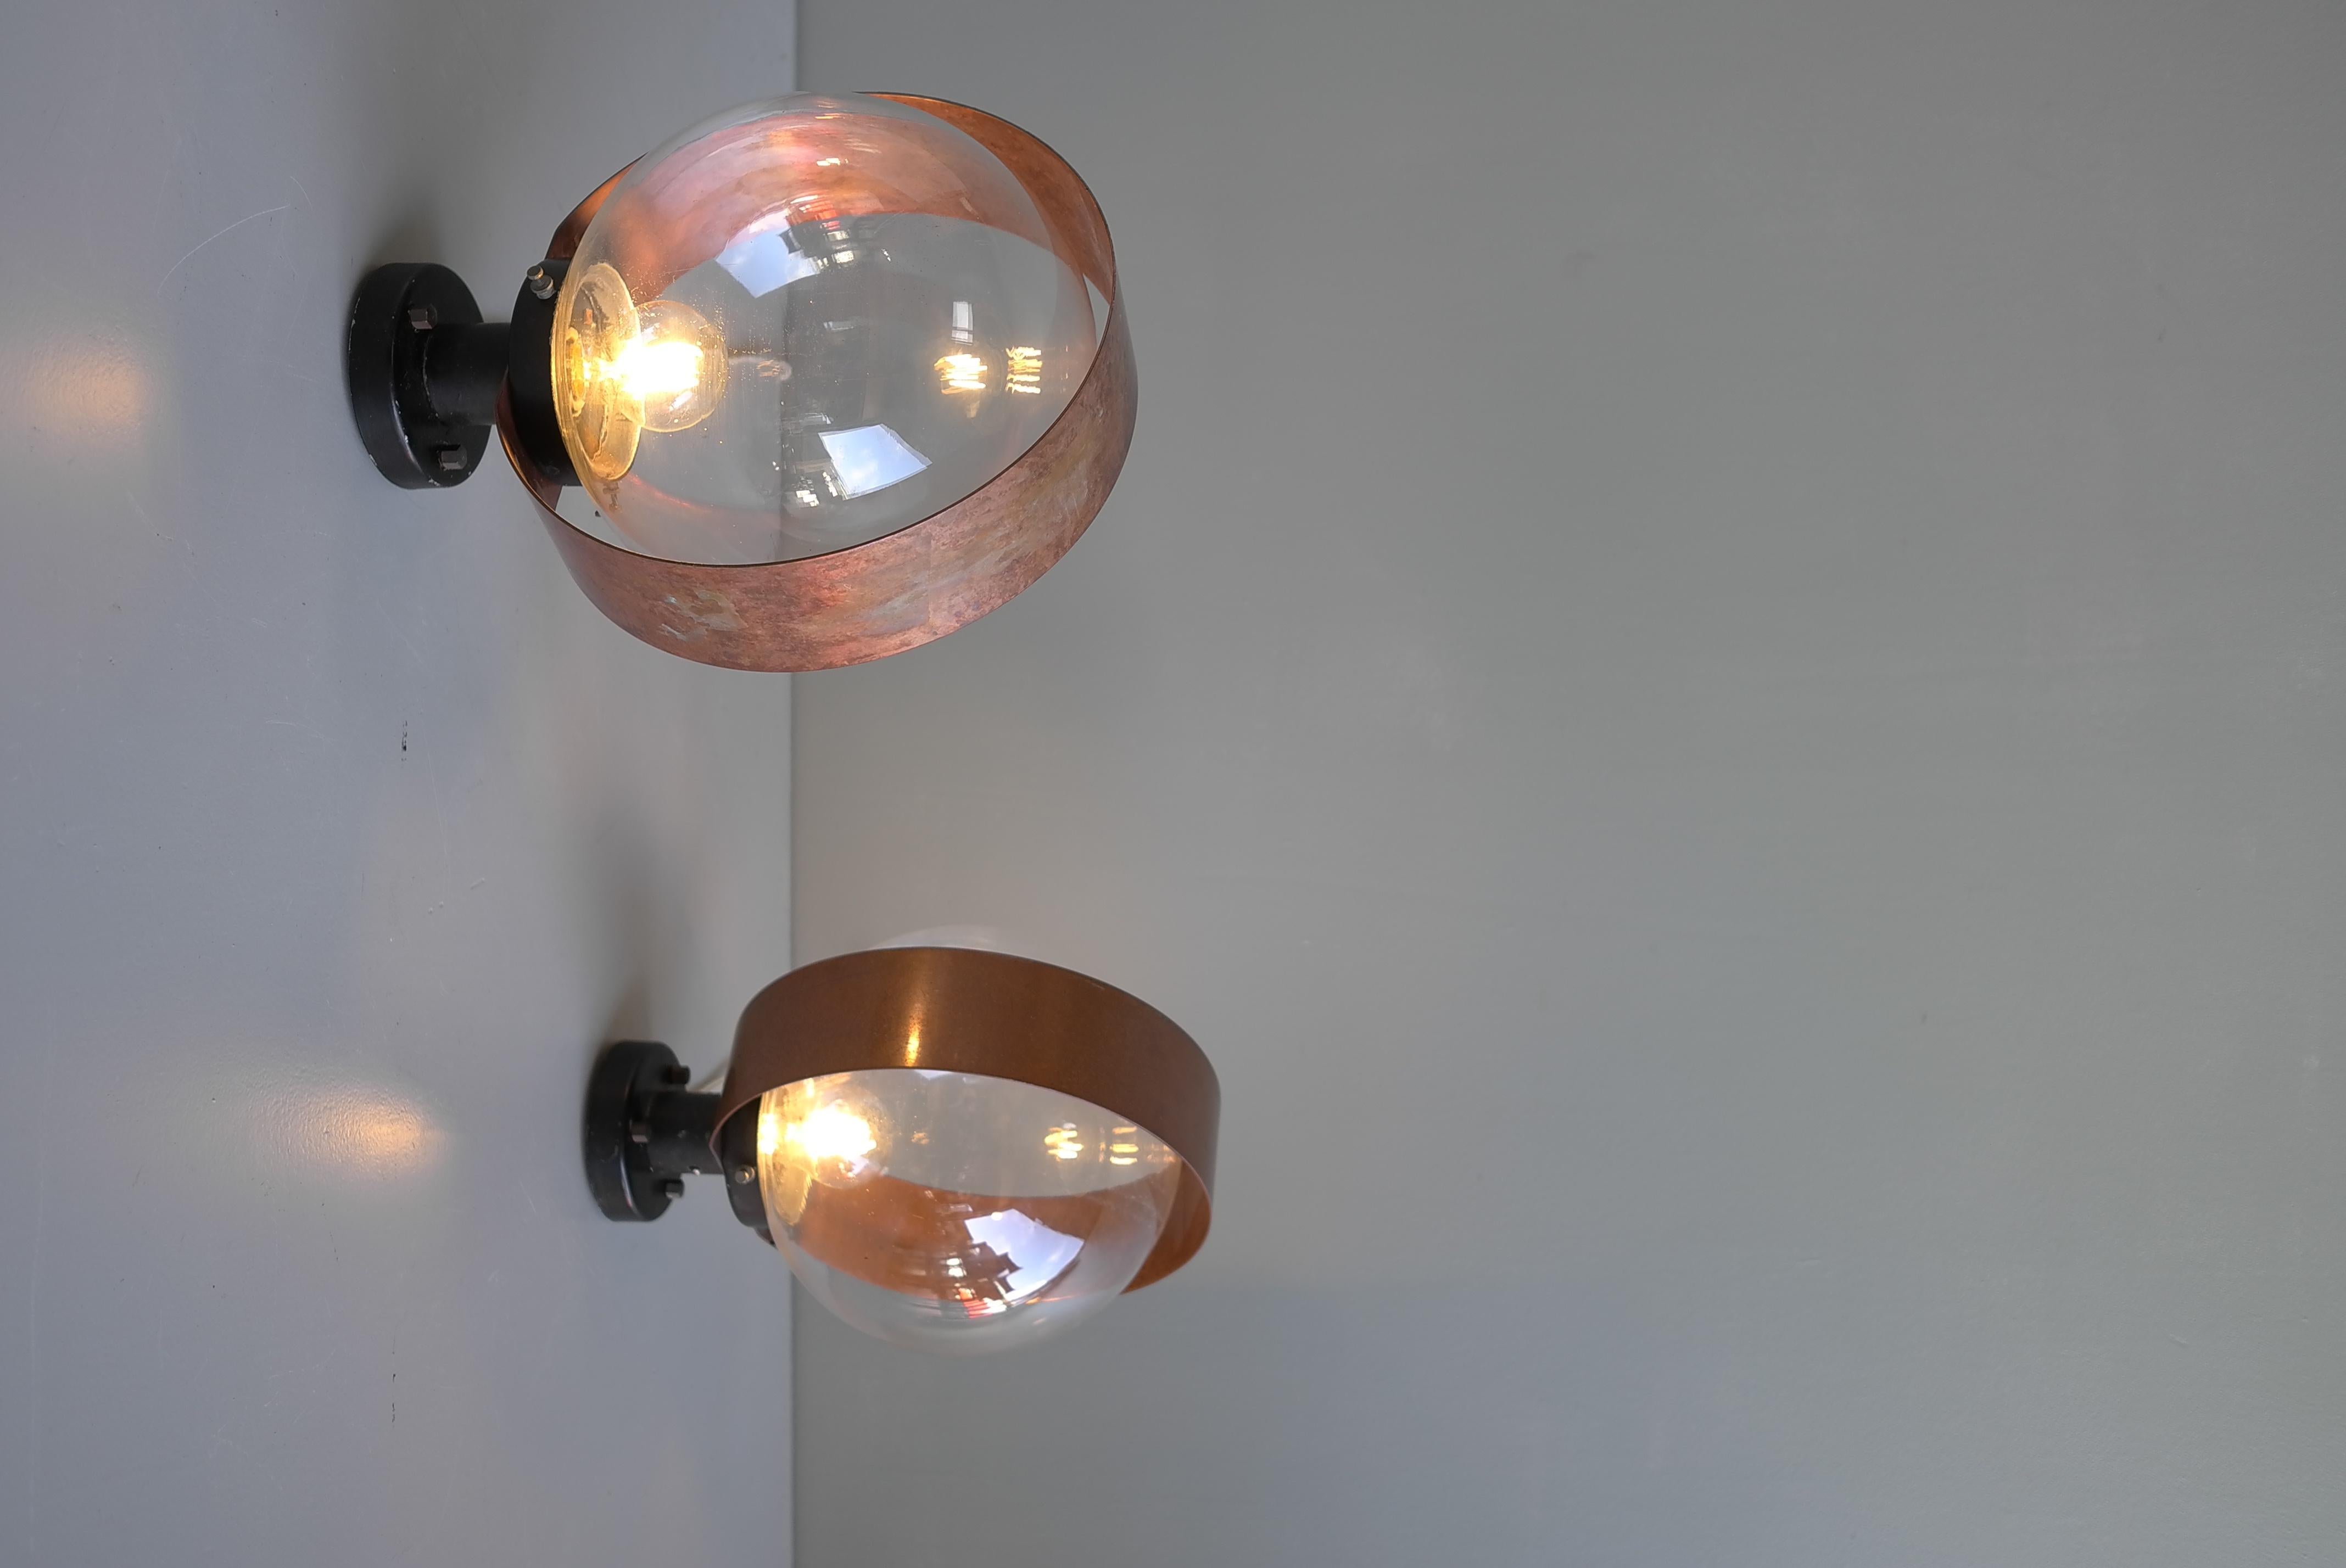 Pair of Scandinavian Glass Ball Wall lamps with Copper Patina Rims, 1960's For Sale 9